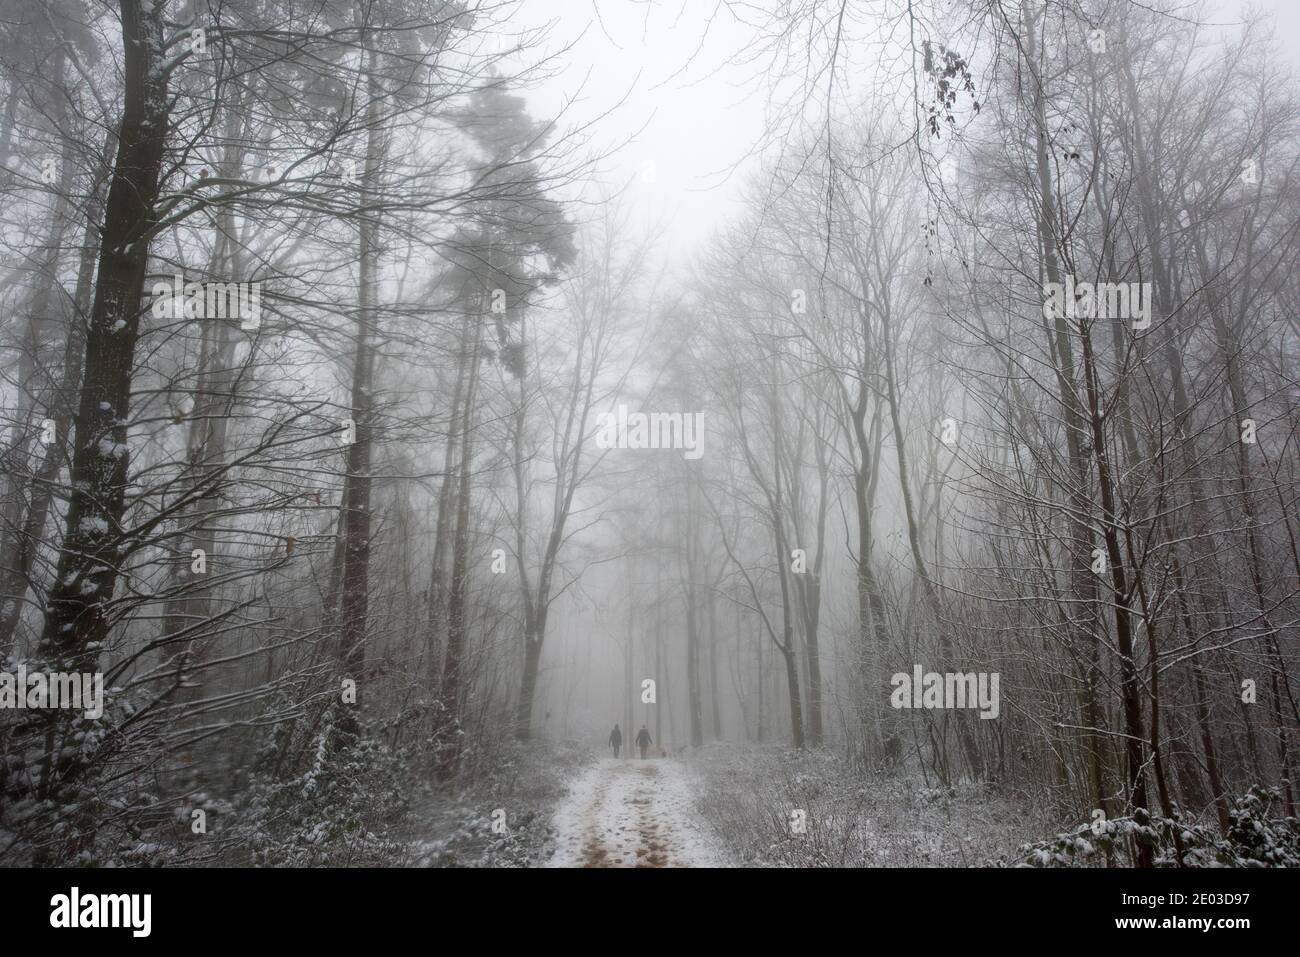 The Vale of Belvoir, Leicestershire, UK. 29th Dec 2020. Dog walkers in the snow in Belvoir woods in the Vale of Belvoir, Leicestershire Neil Squires/Alamy Live News Stock Photo